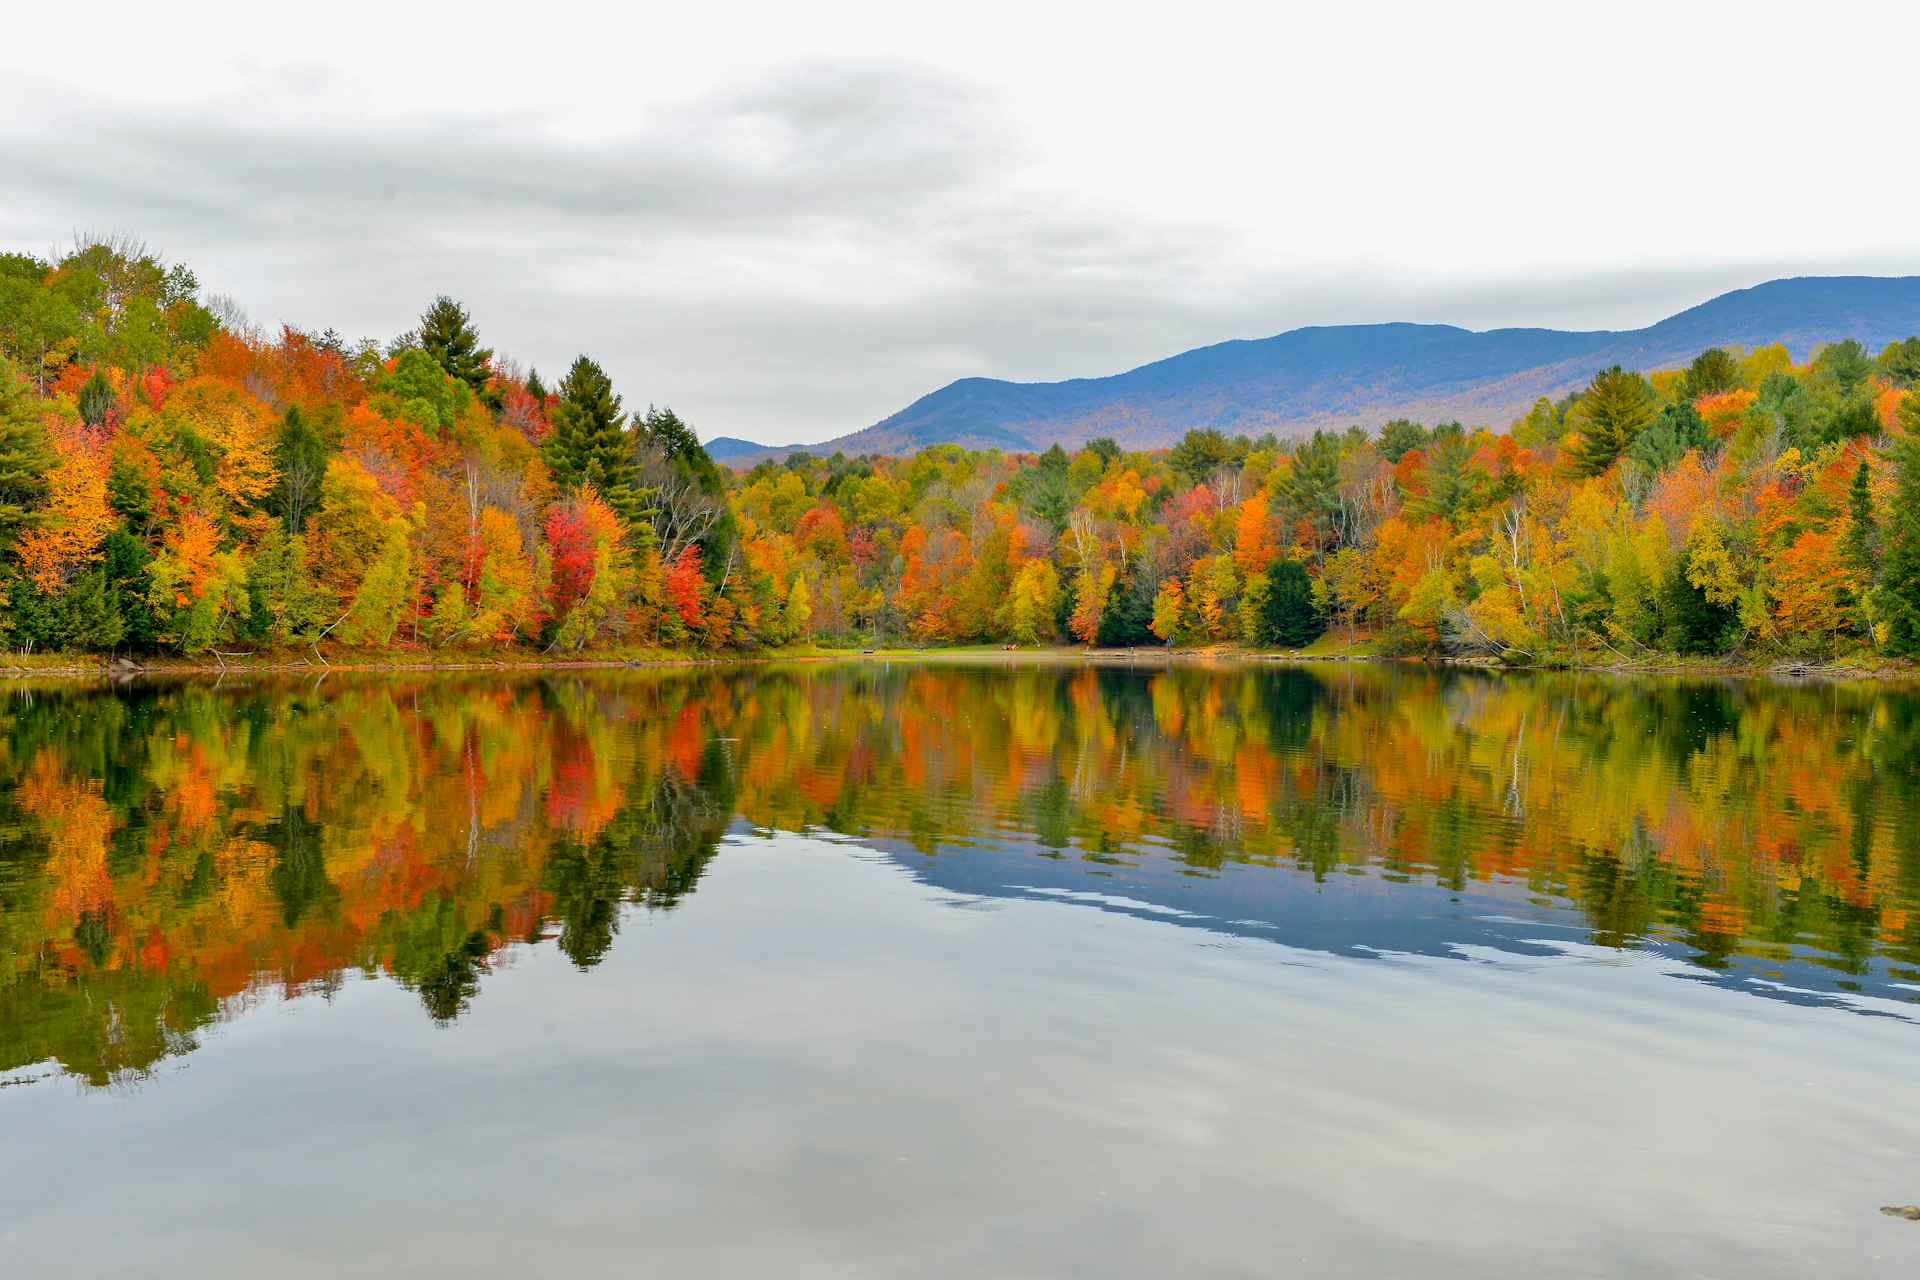 Autumn forest and mountains reflected in the Waterbury Reservoir near Stowe, Vermont